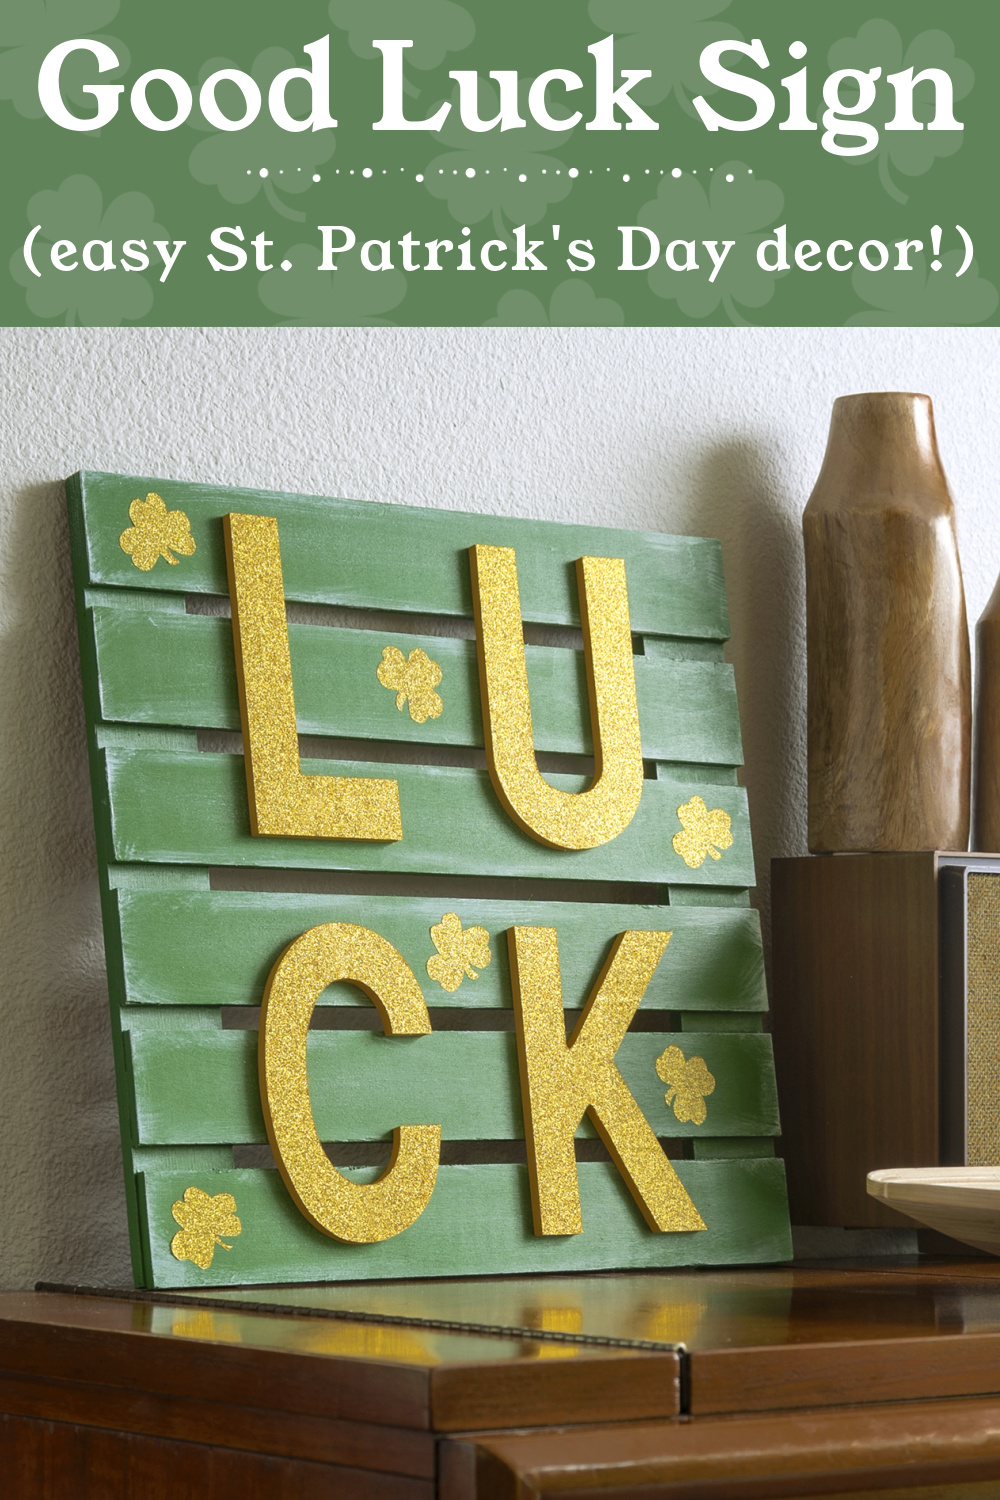 Good Luck Sign for St. Patrick's Day